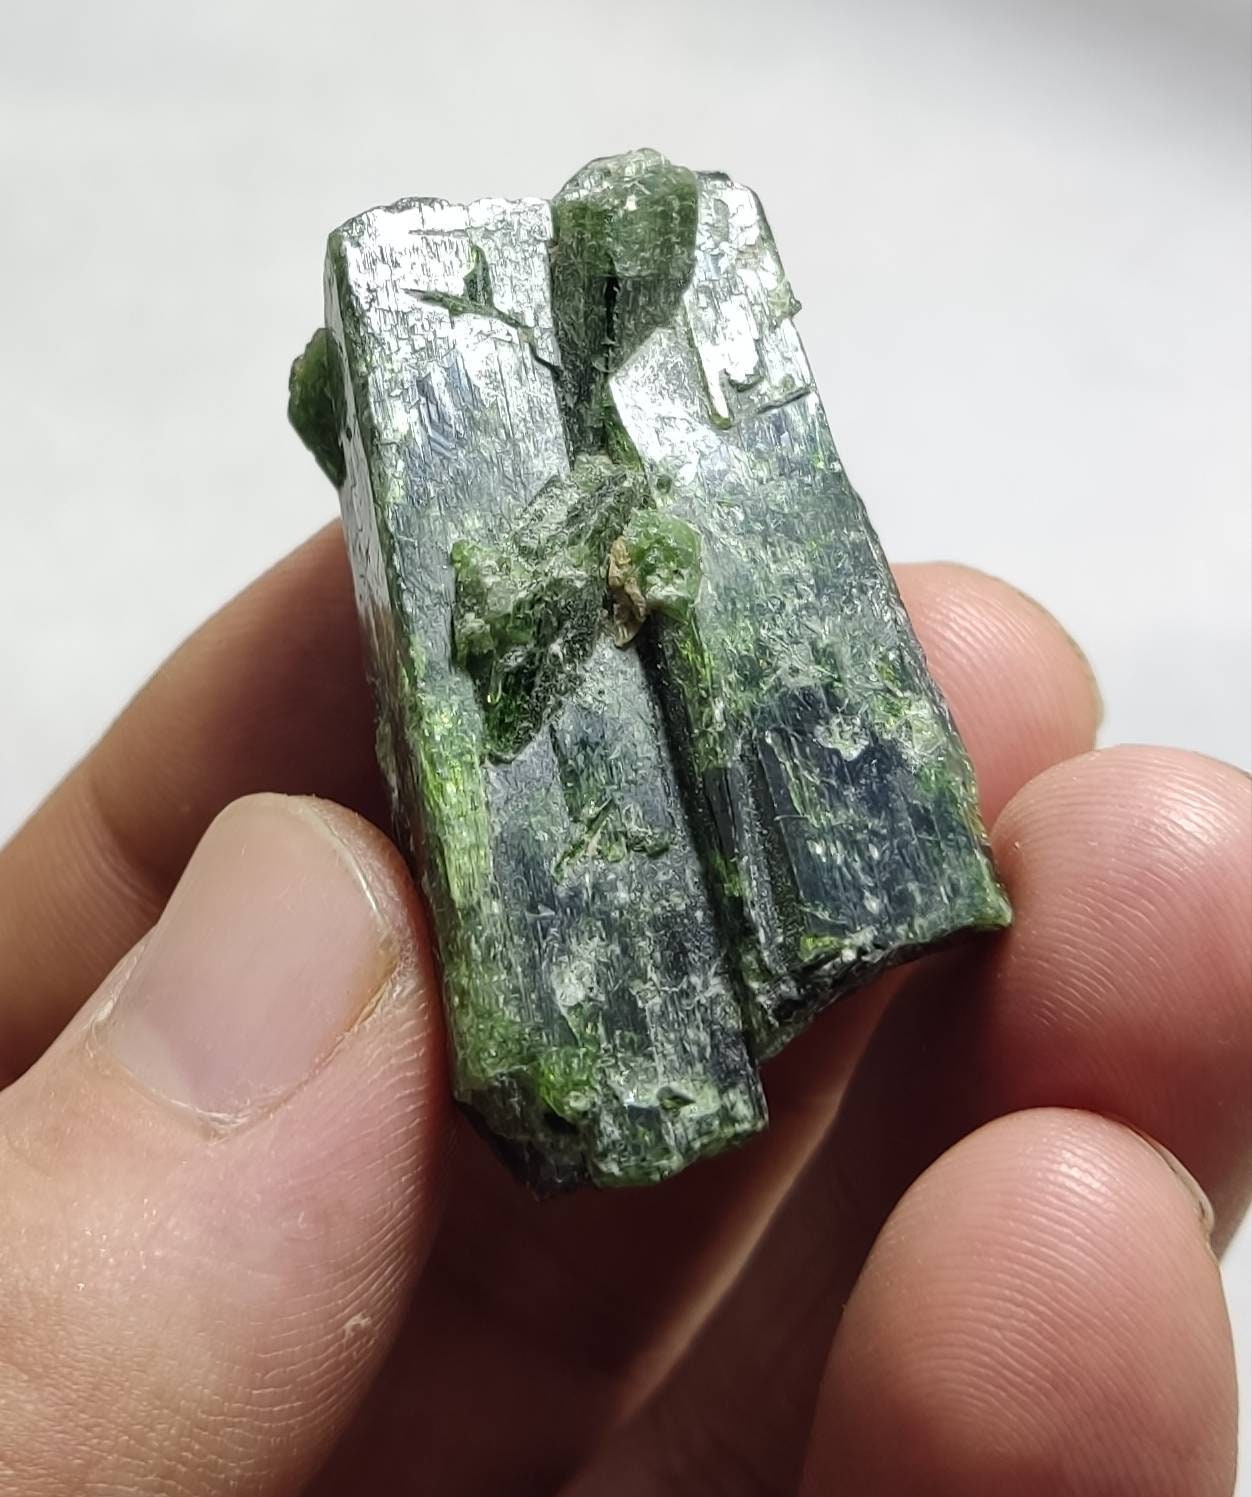 An amazing specimen of diopside crystal 45 grams